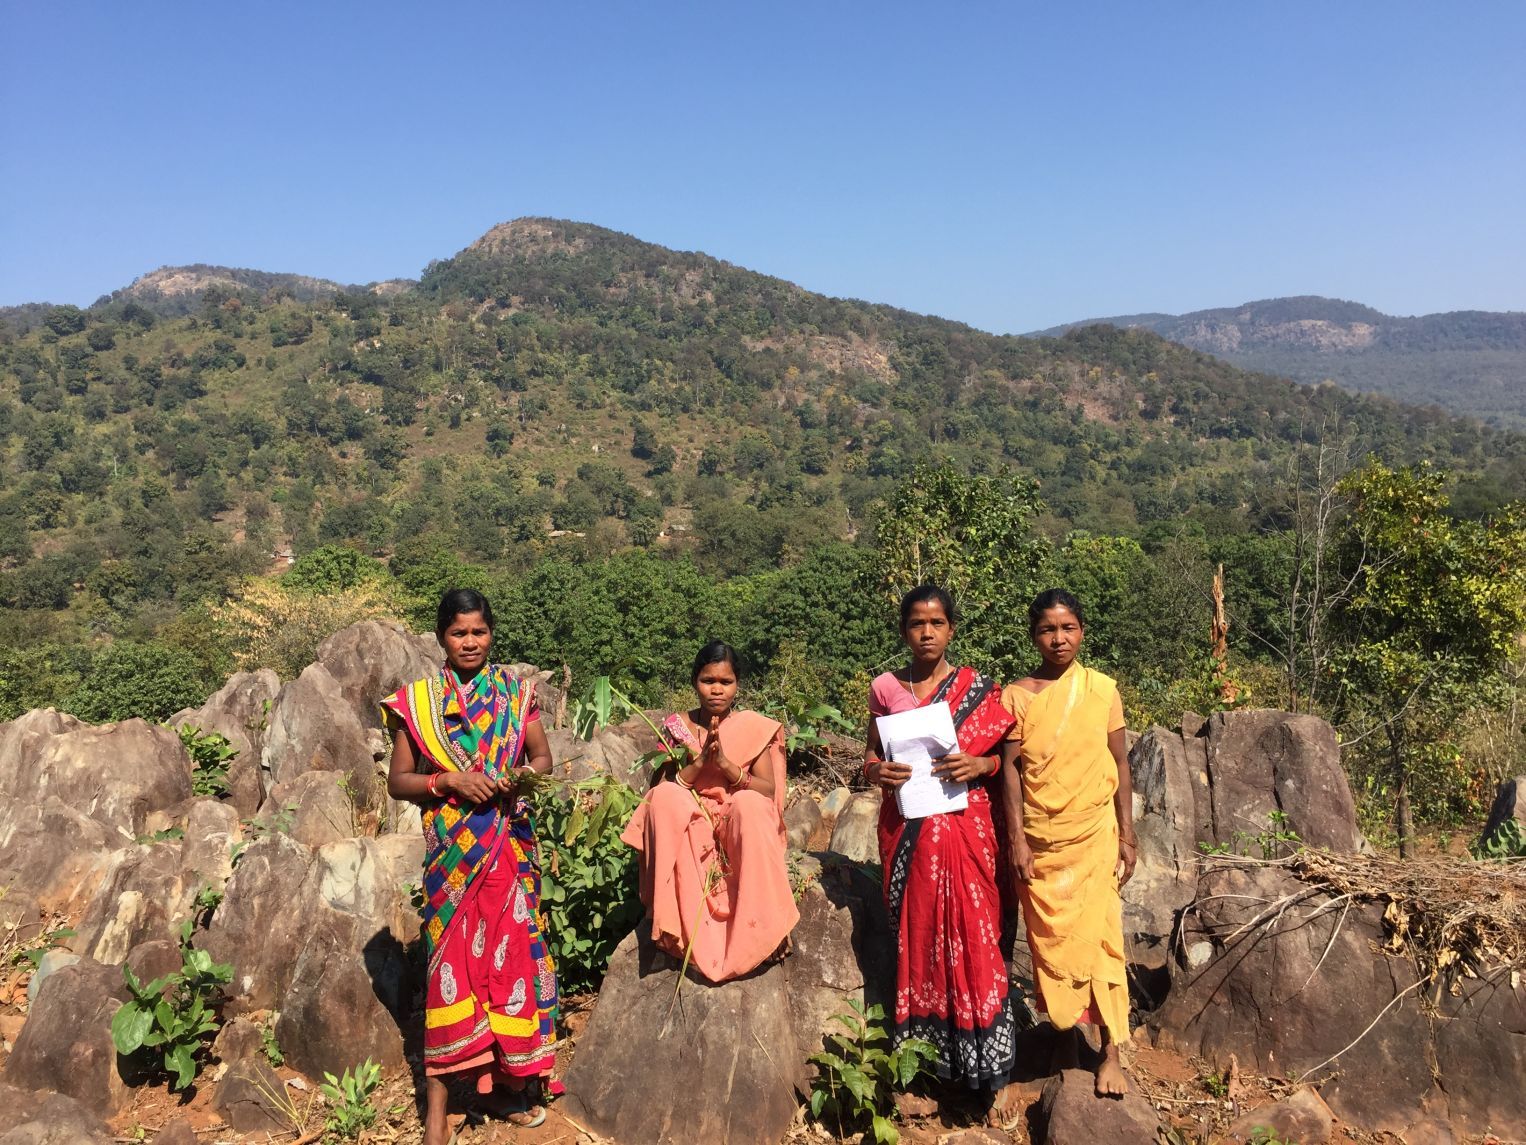 Adivasi residents in Benedihi village of Keonjhar, Odisha have been in conflict with the forest department over plantations on their shifting cultivation lands. Odisha is set to receive the largest share of CAF money in the country - over Rs 6000 crores ( $862 million ). Chhattisgarh, India. June 2019. Image by Chitrangada Choudhury.